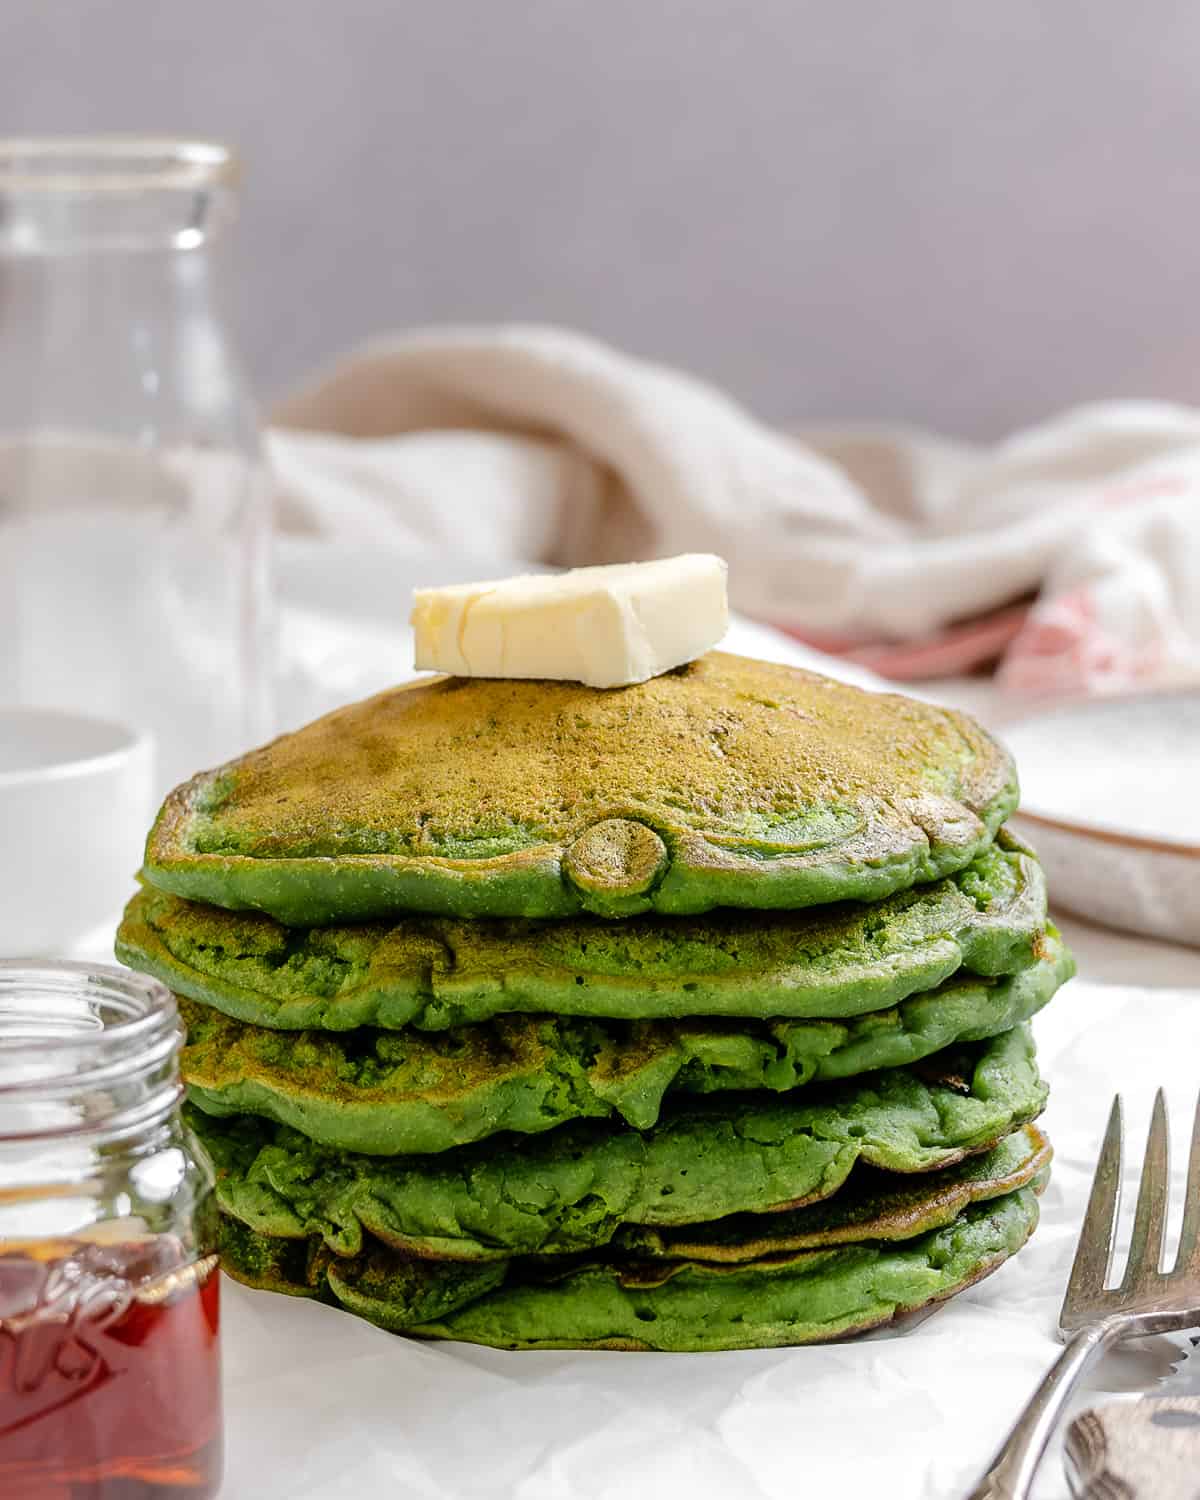 completed stack of Easy Banana Spinach Pancakes against a light surface